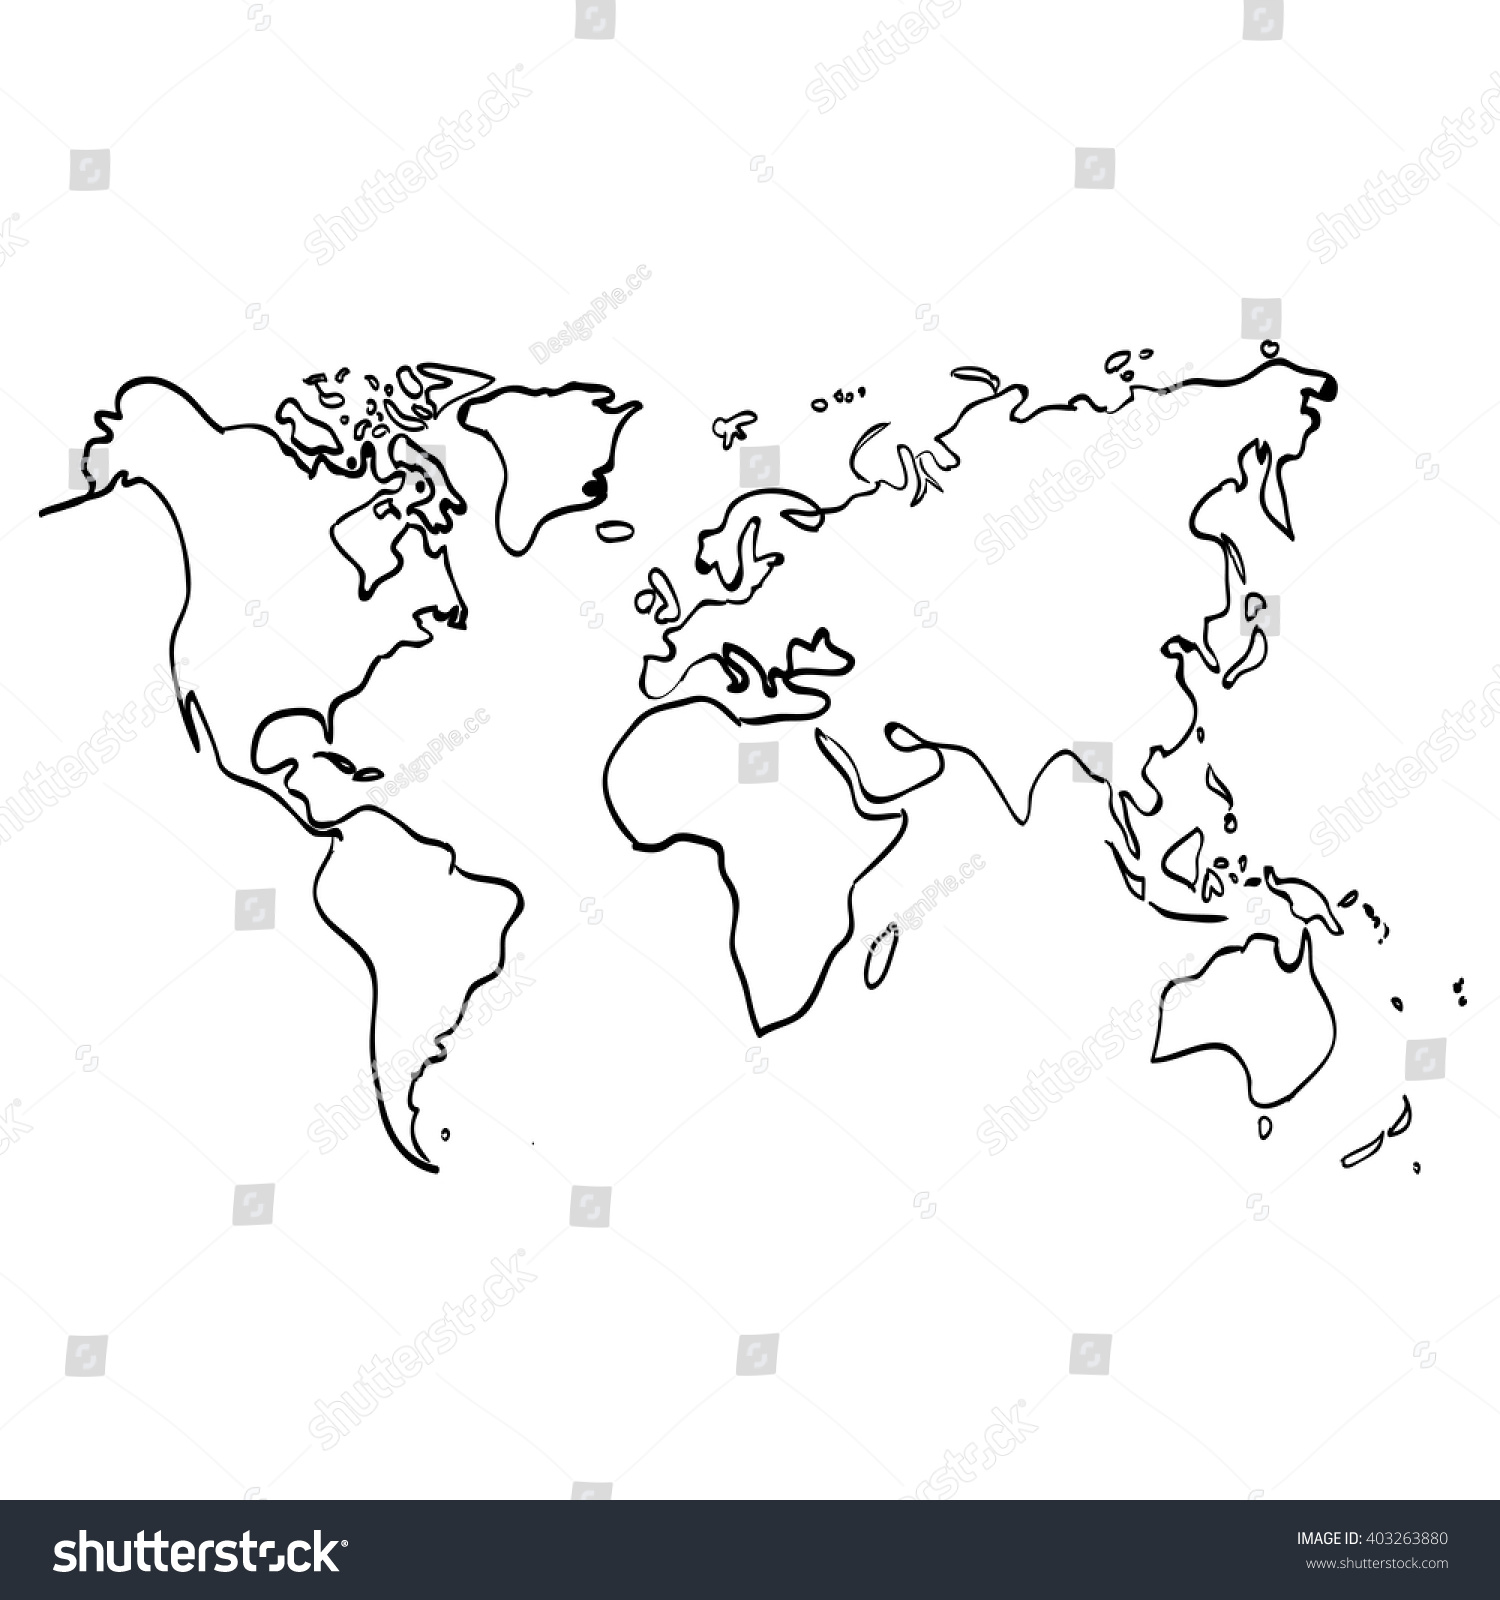 Vector World Map On White Background Stock Vector (Royalty Free ...